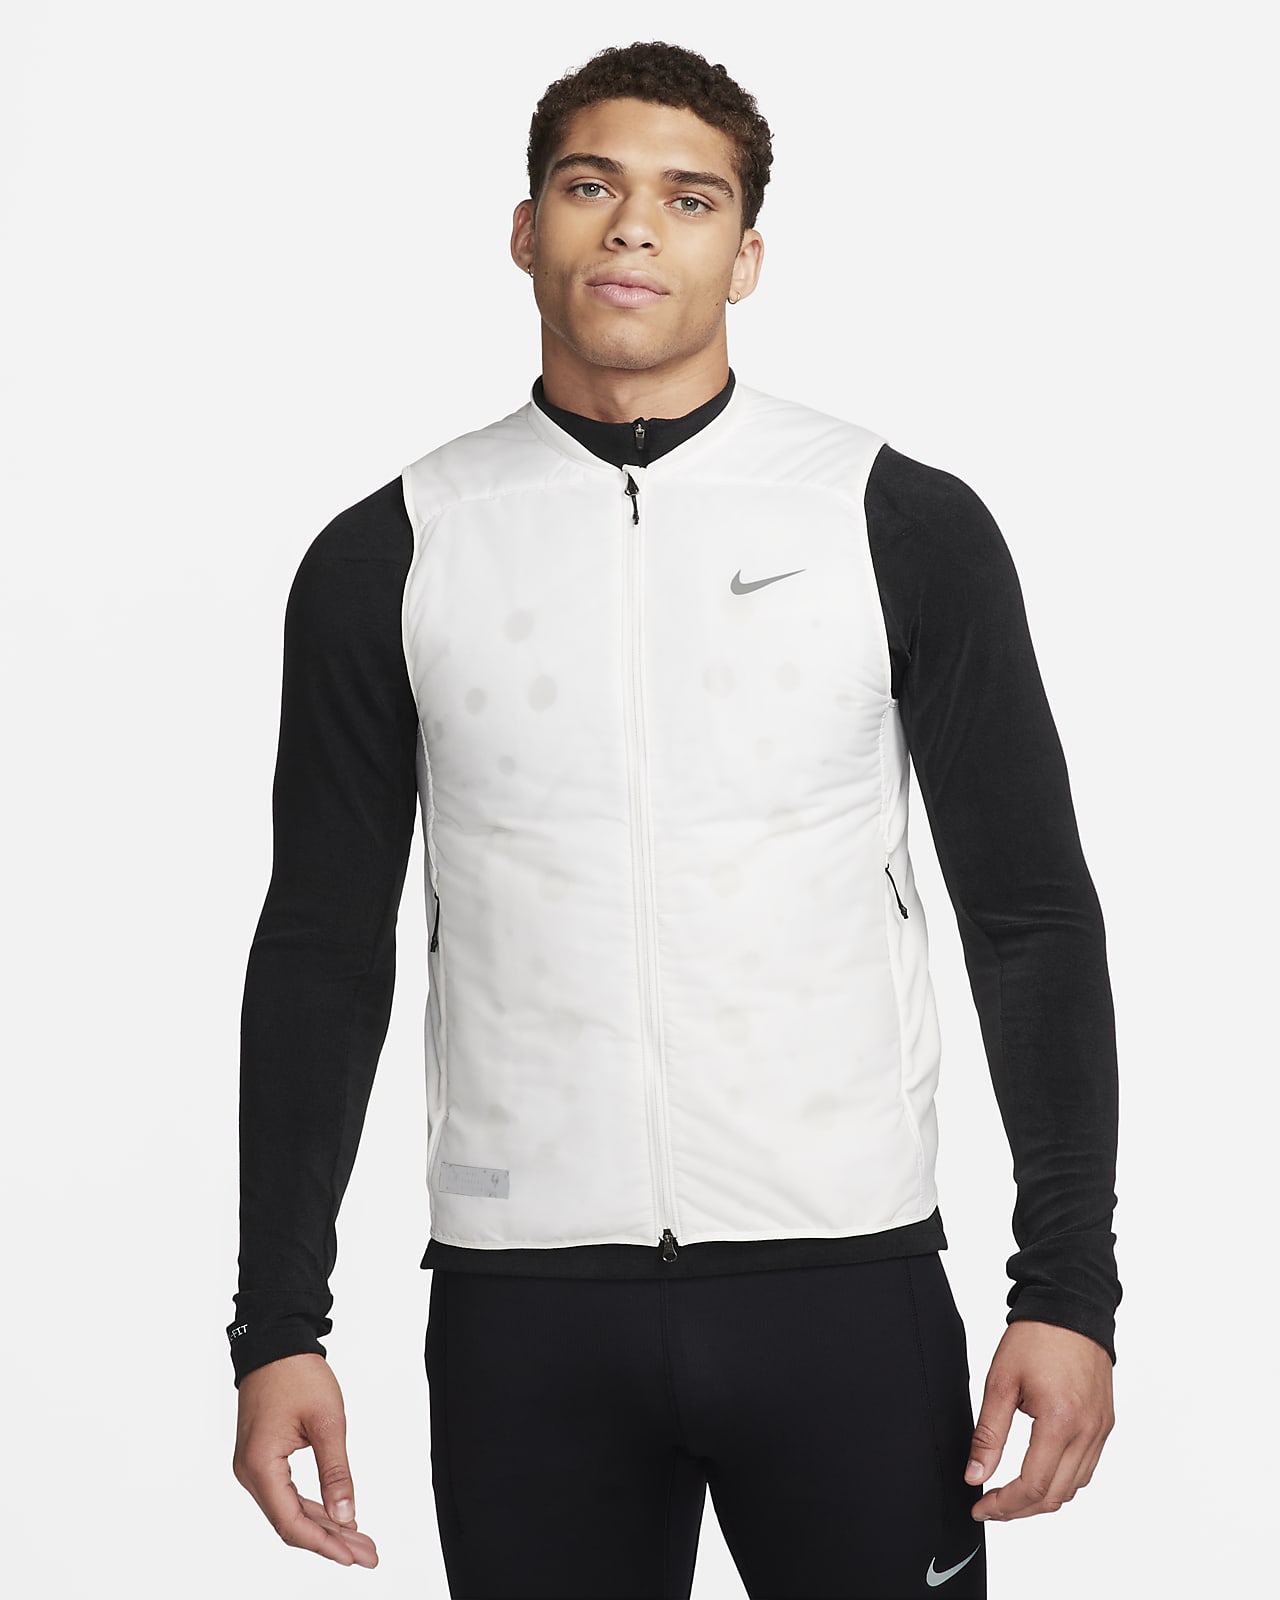 Nike Running Division AeroLayer Men's Therma-FIT ADV Running Vest